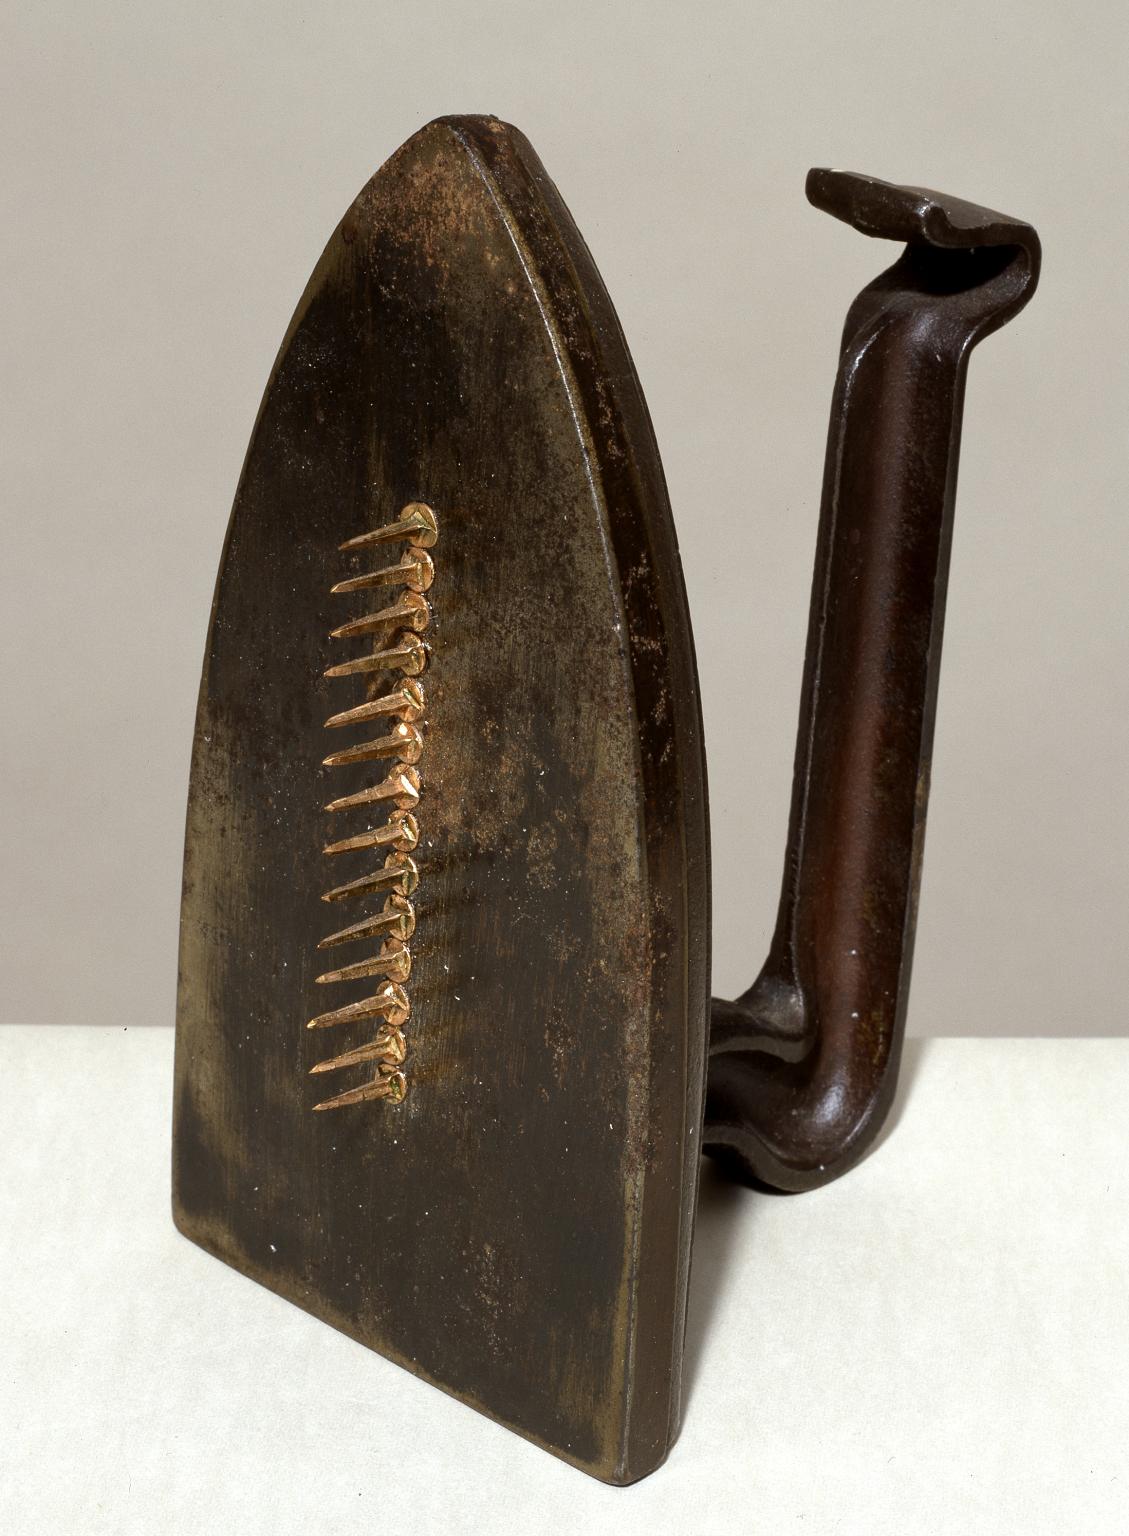 Man Ray, Cadeau, 1921, editioned replica 1972, assemblage, 17 × 9 × 12 cm, Tate Gallery, London